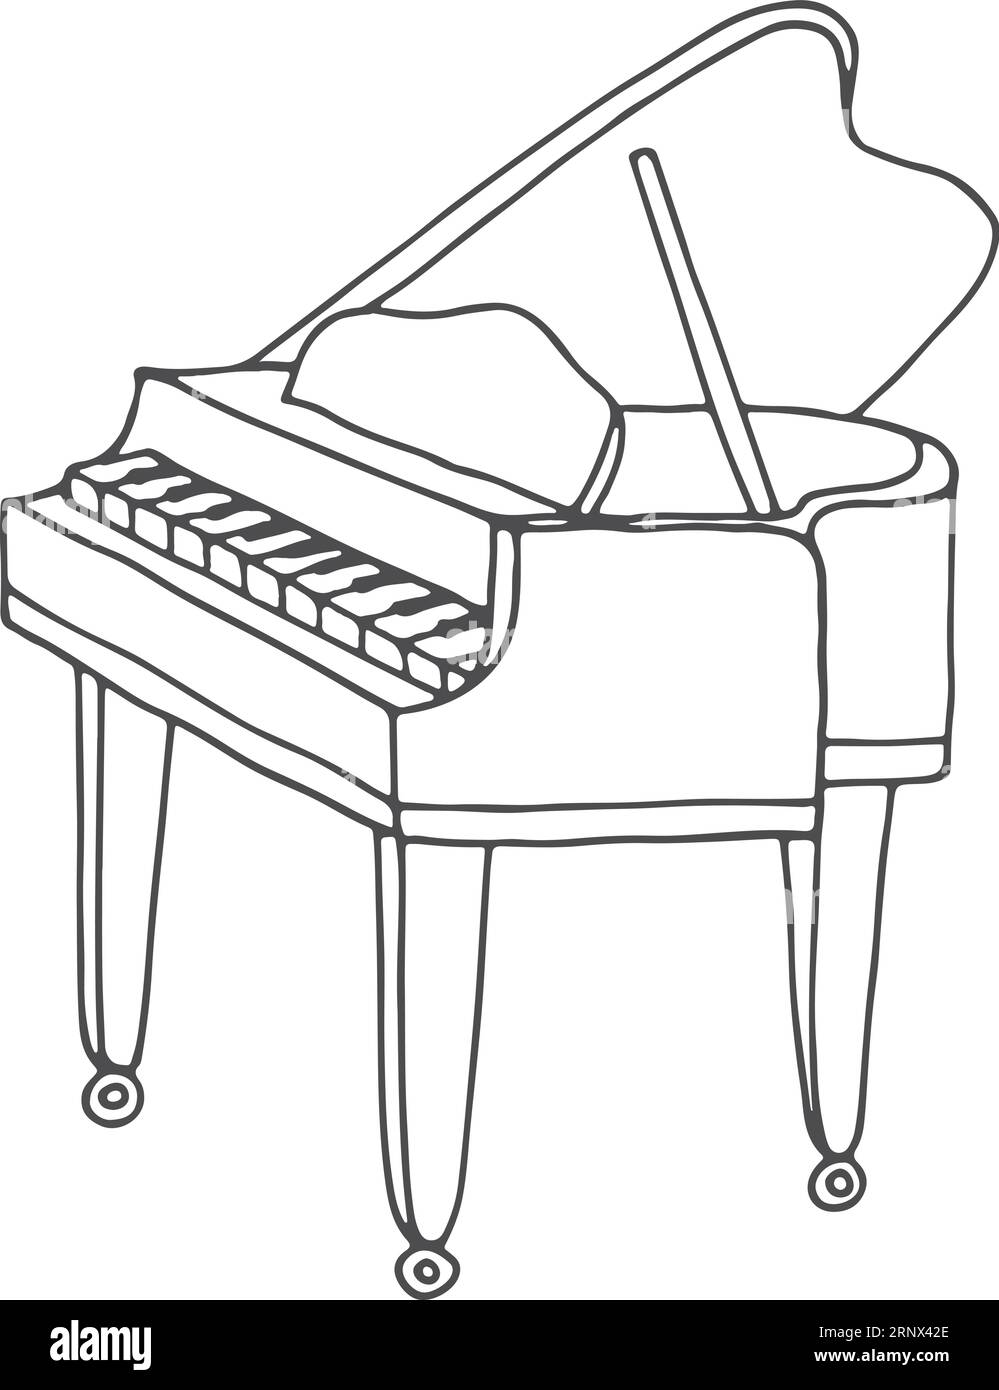 Grand piano doodle. Classic music instrument sketch Stock Vector